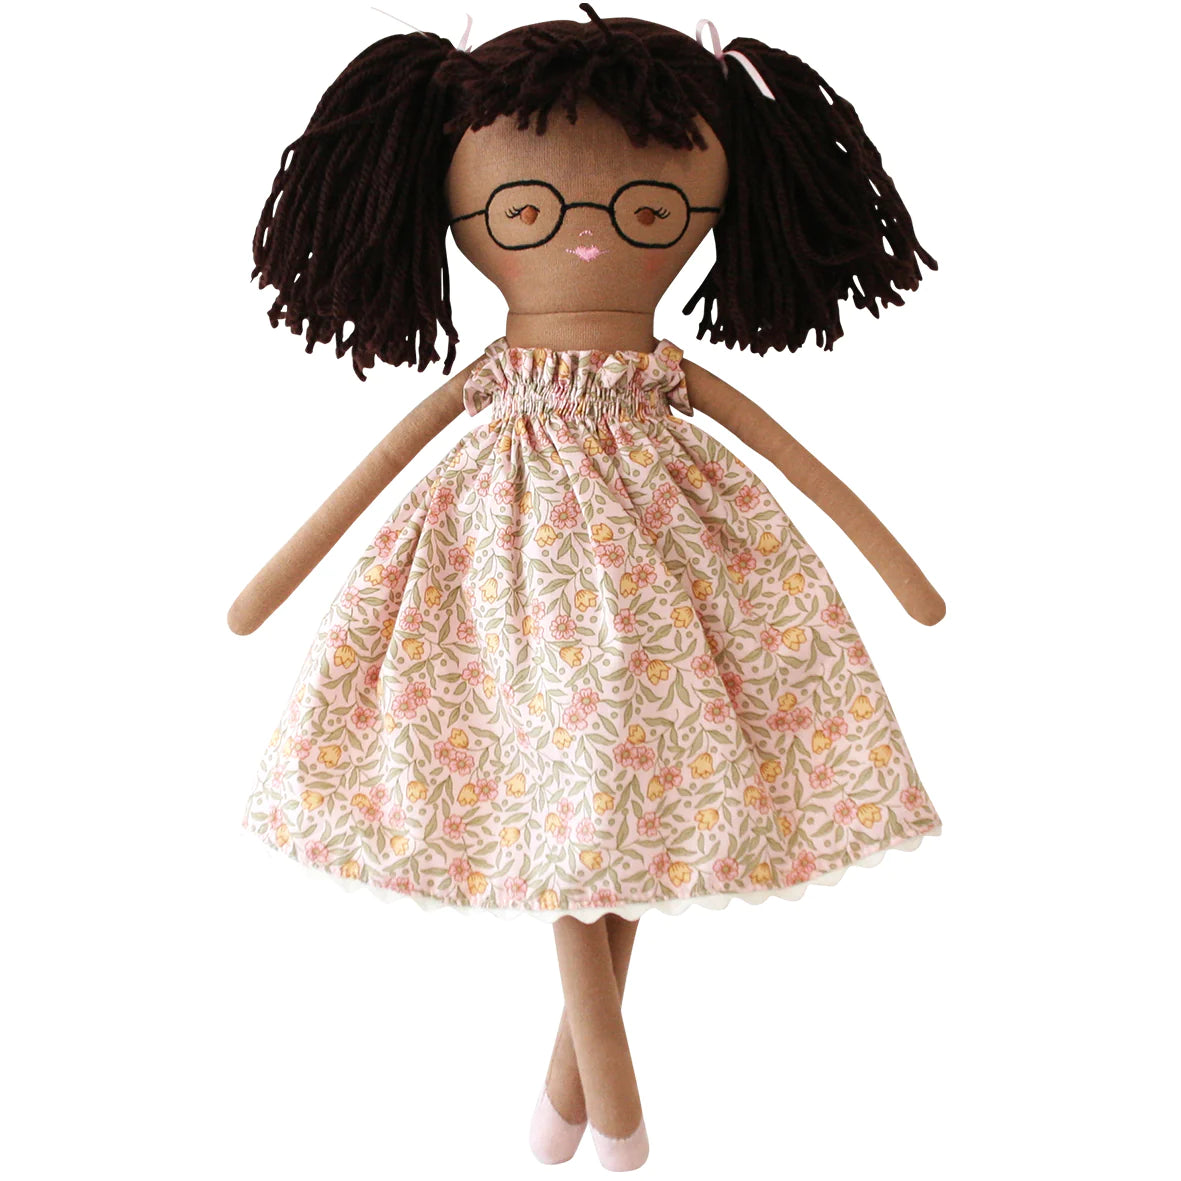 doll with glasses and brown hair ponytails in floral dress